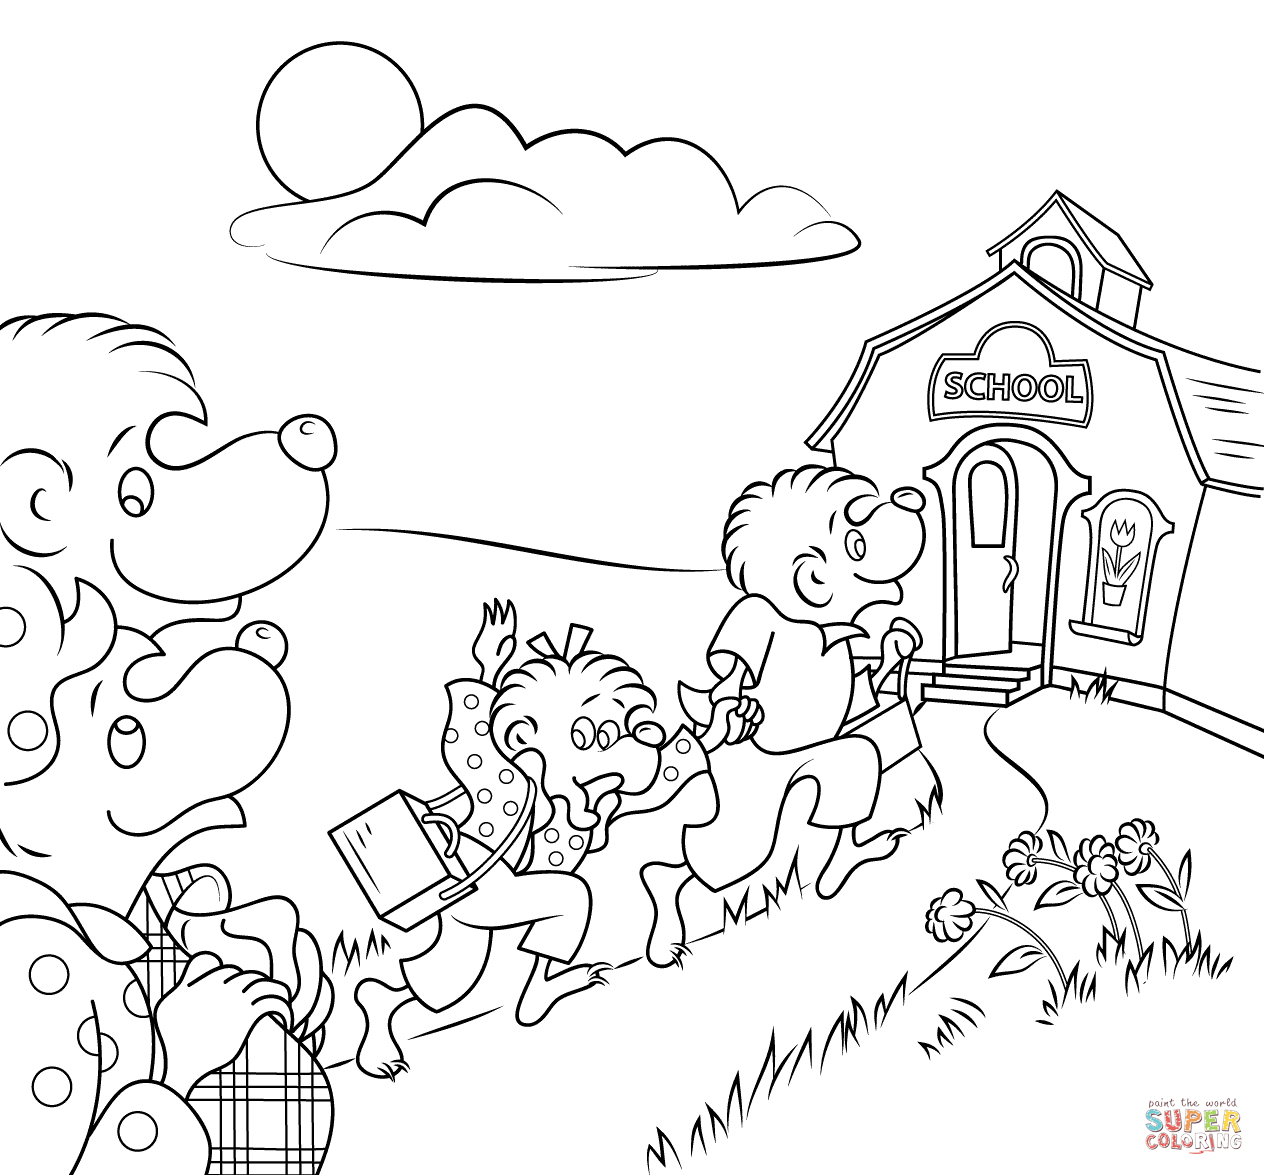 Berenstain Bears Coloring Pages Berenstain Bears Go To School Coloring Page Free Printable